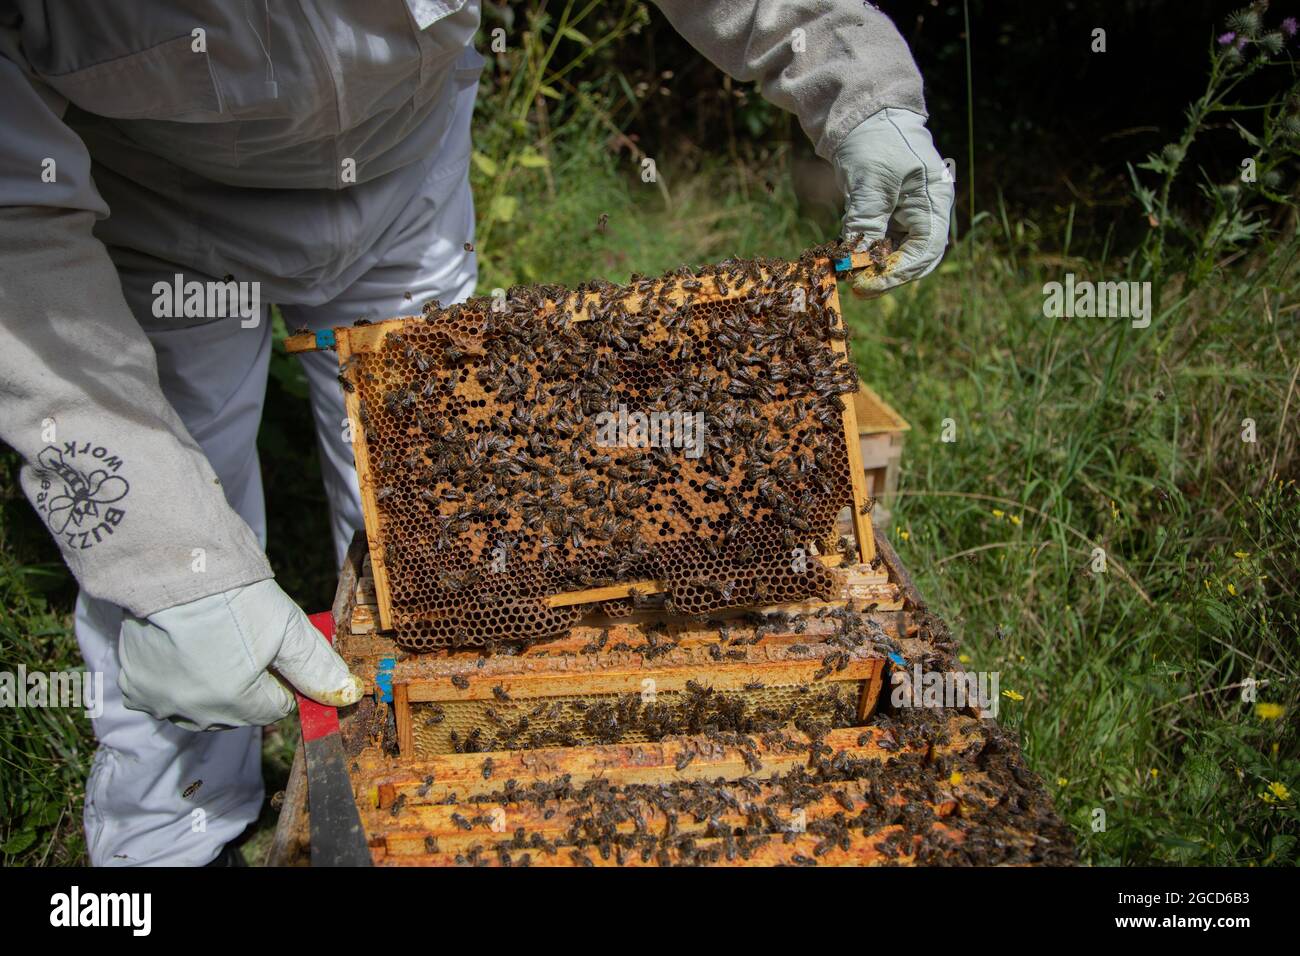 A brood frame showing a poor laying pattern. Stock Photo